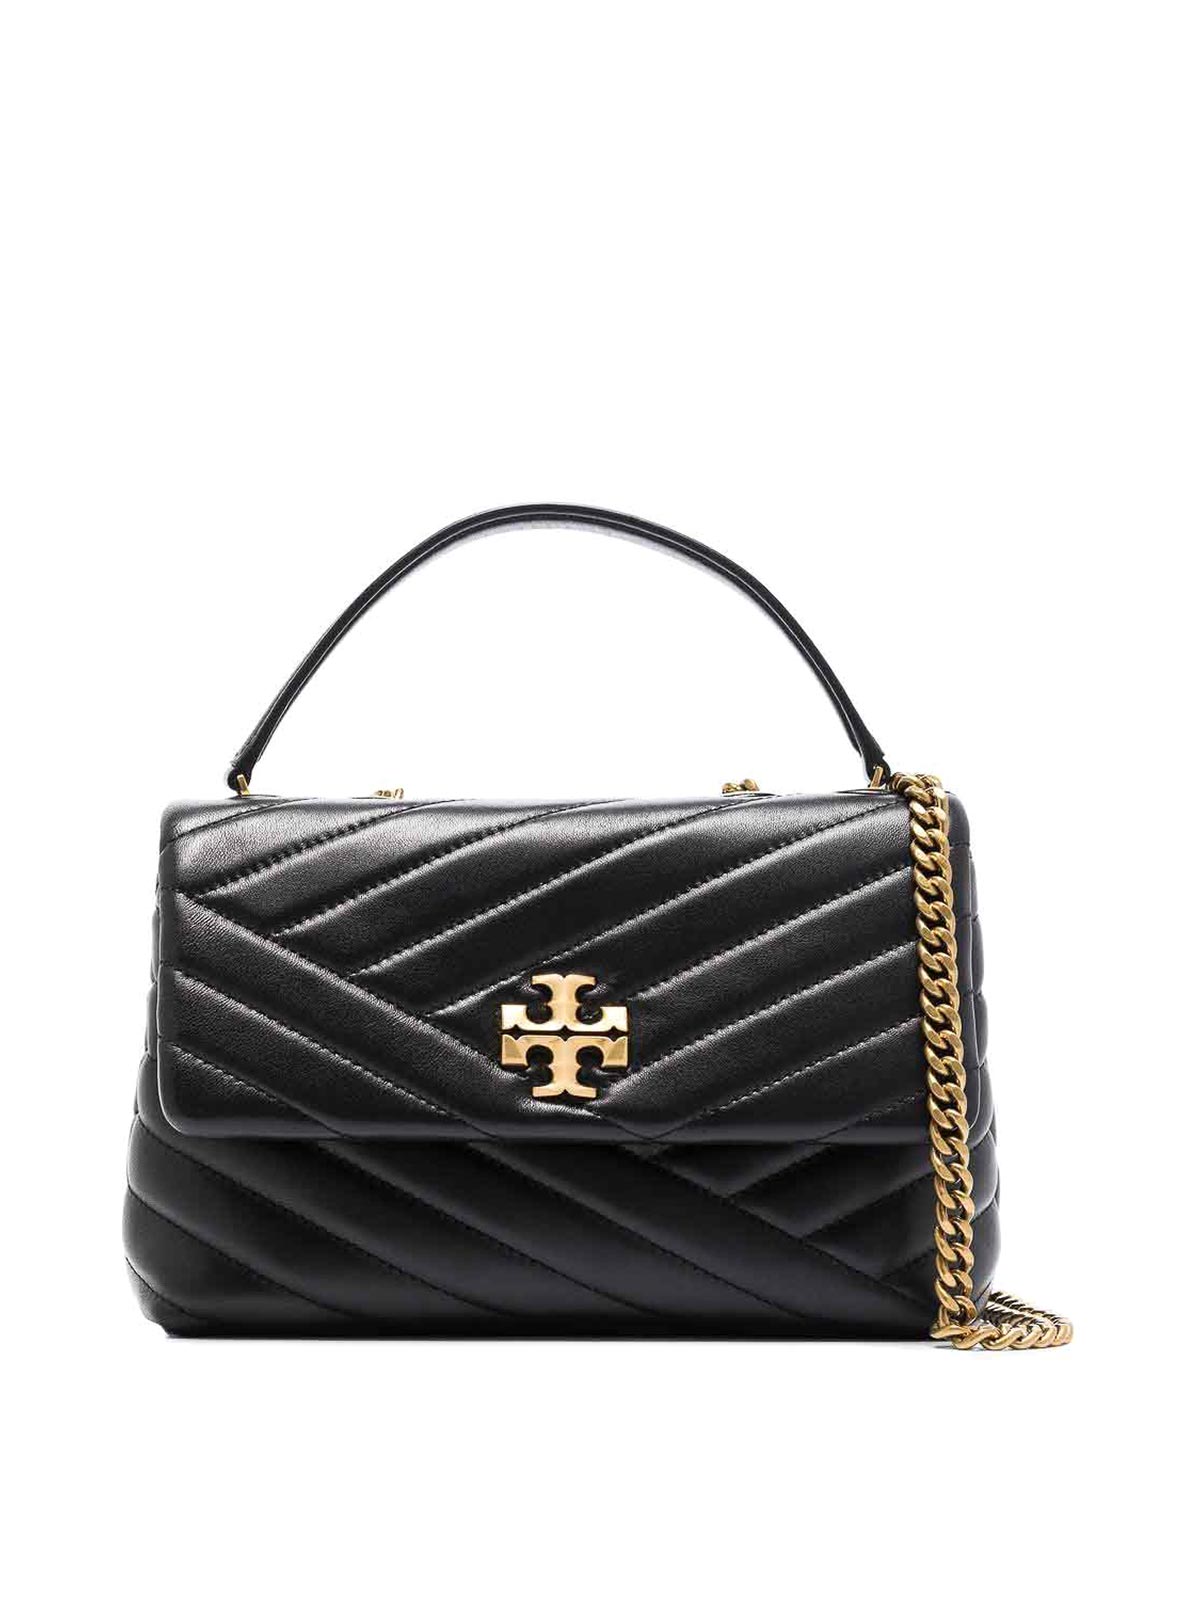 Tory Burch Kira Small Leather Shoulder Bag In Negro